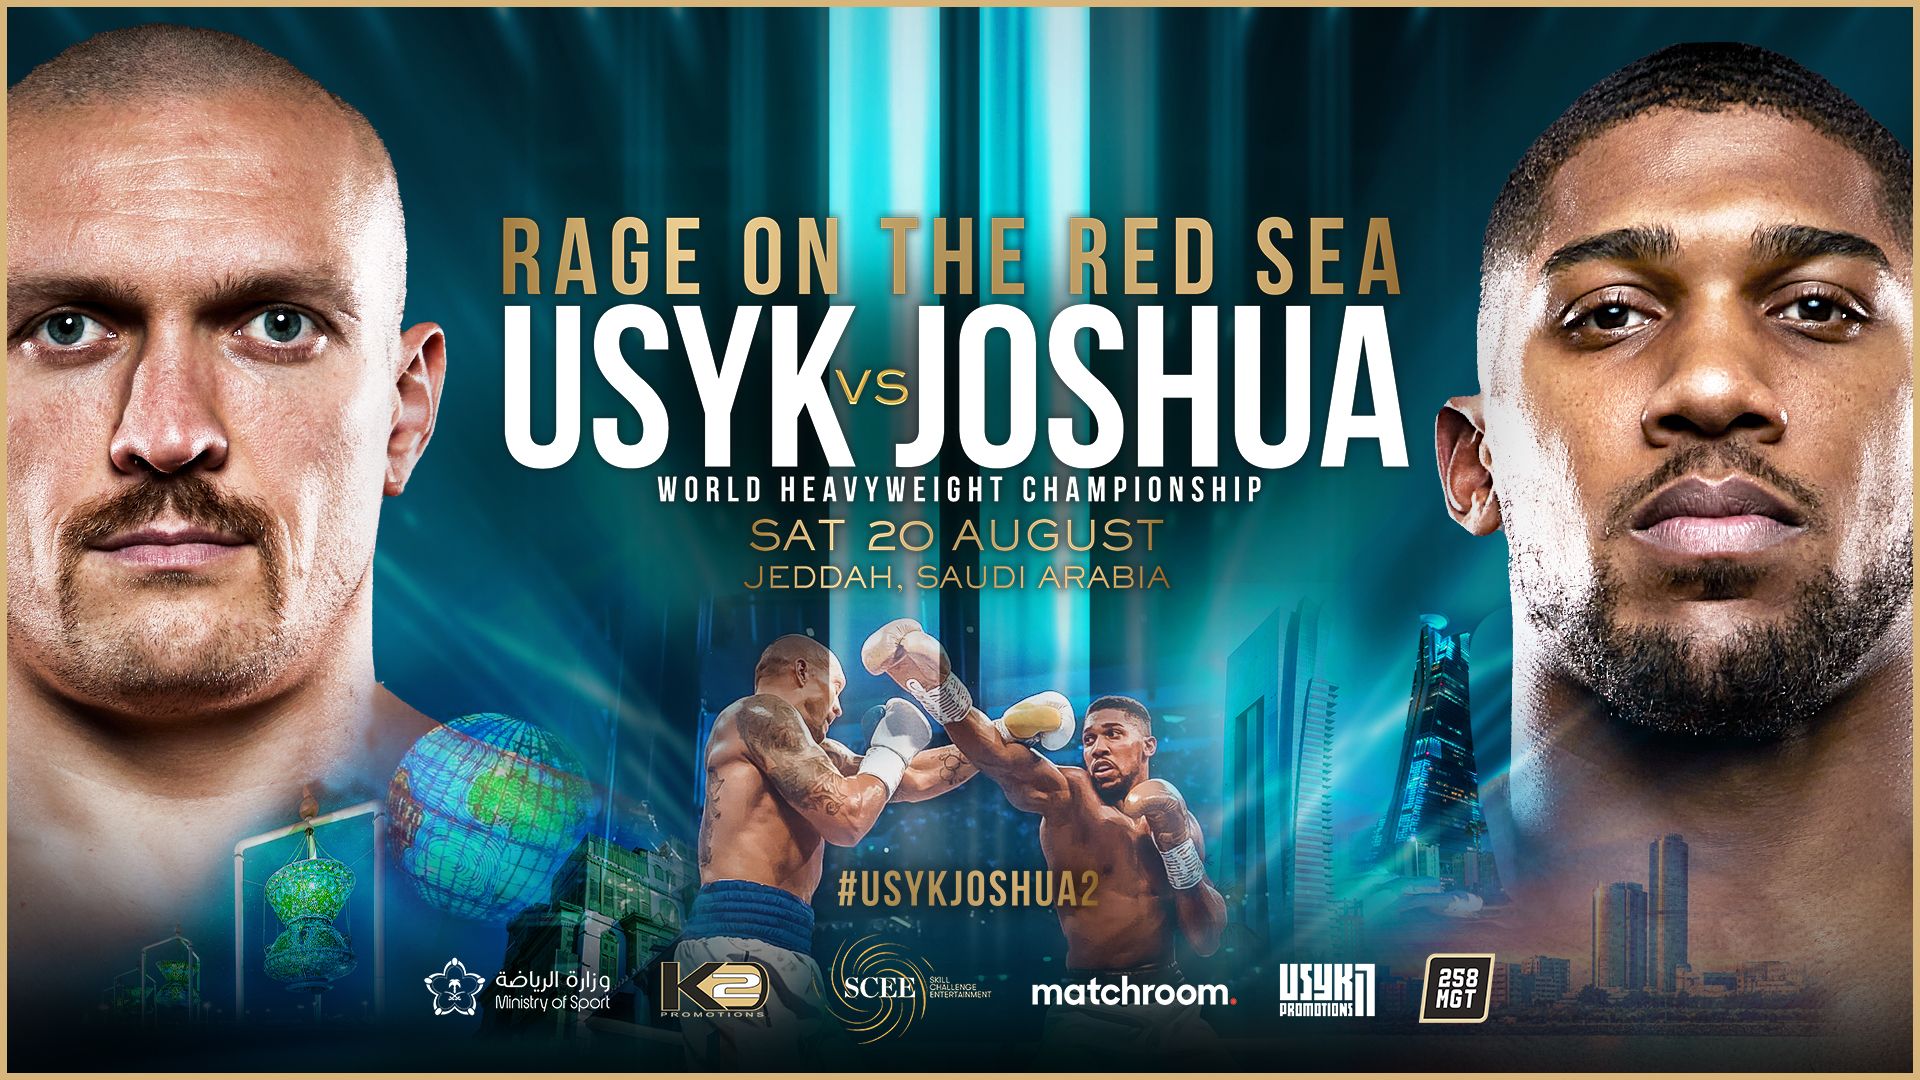 Matchroom announces August 20th For Usyk-Joshua II